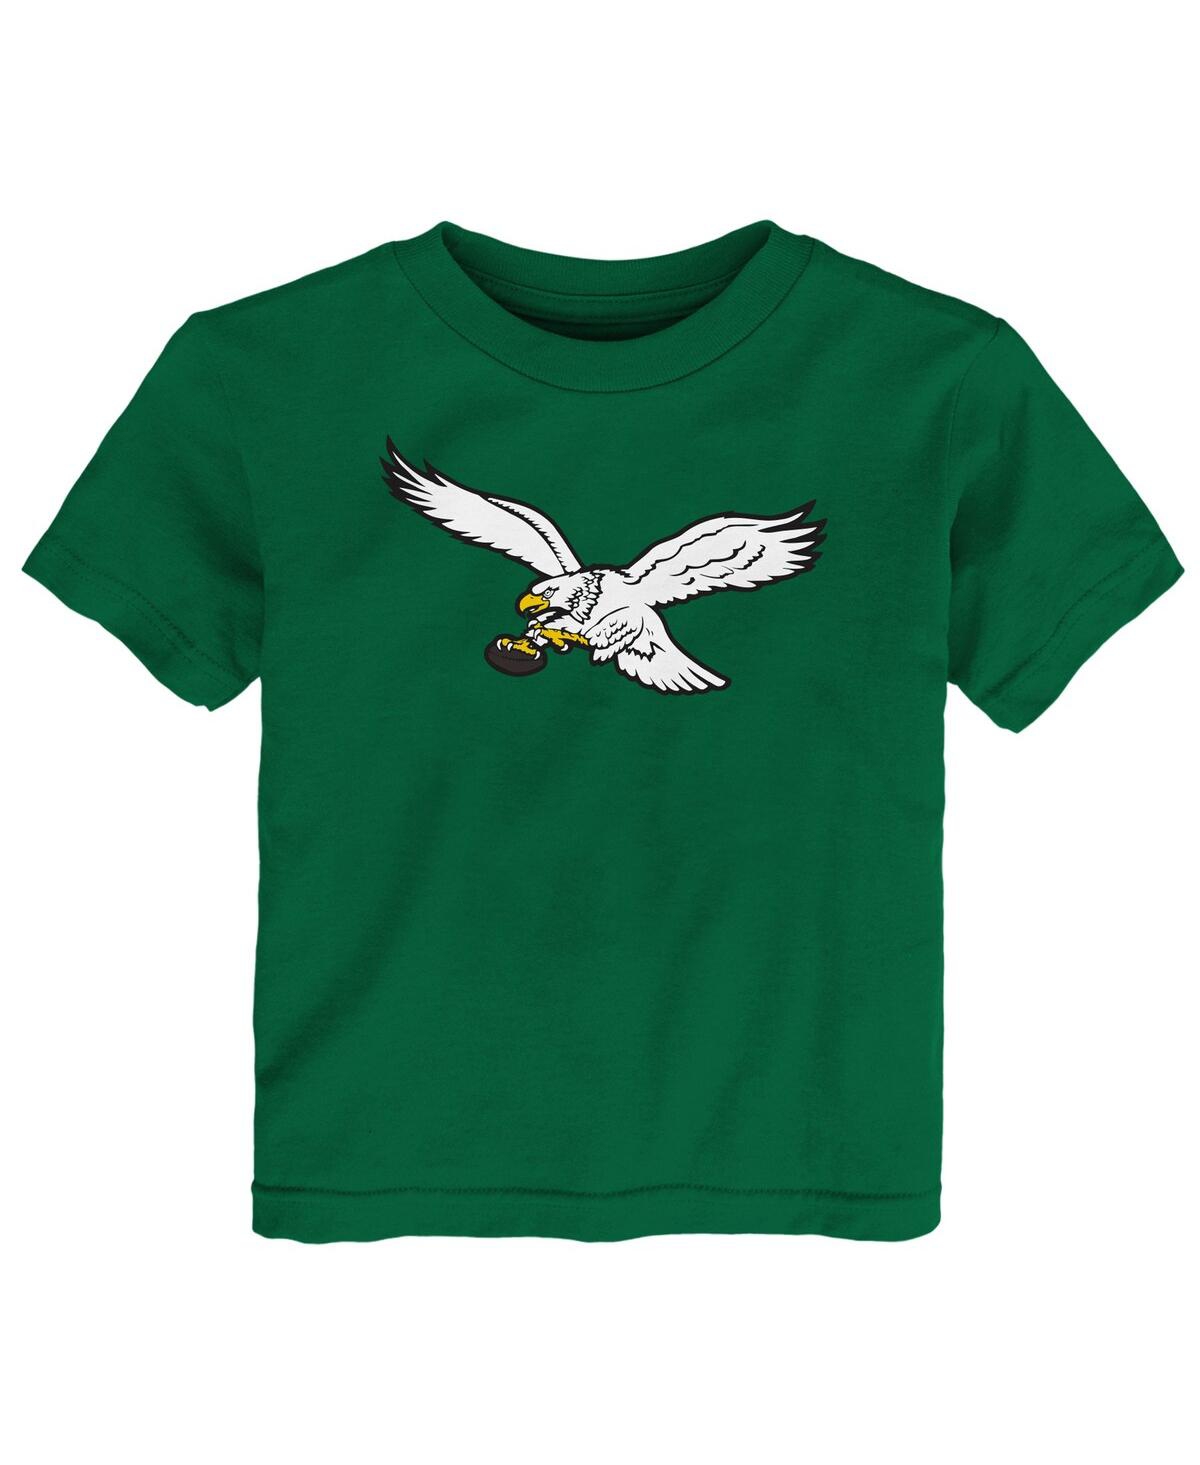 Outerstuff Babies' Toddler Boys And Girls Kelly Green Distressed Philadelphia Eagles Retro T-shirt